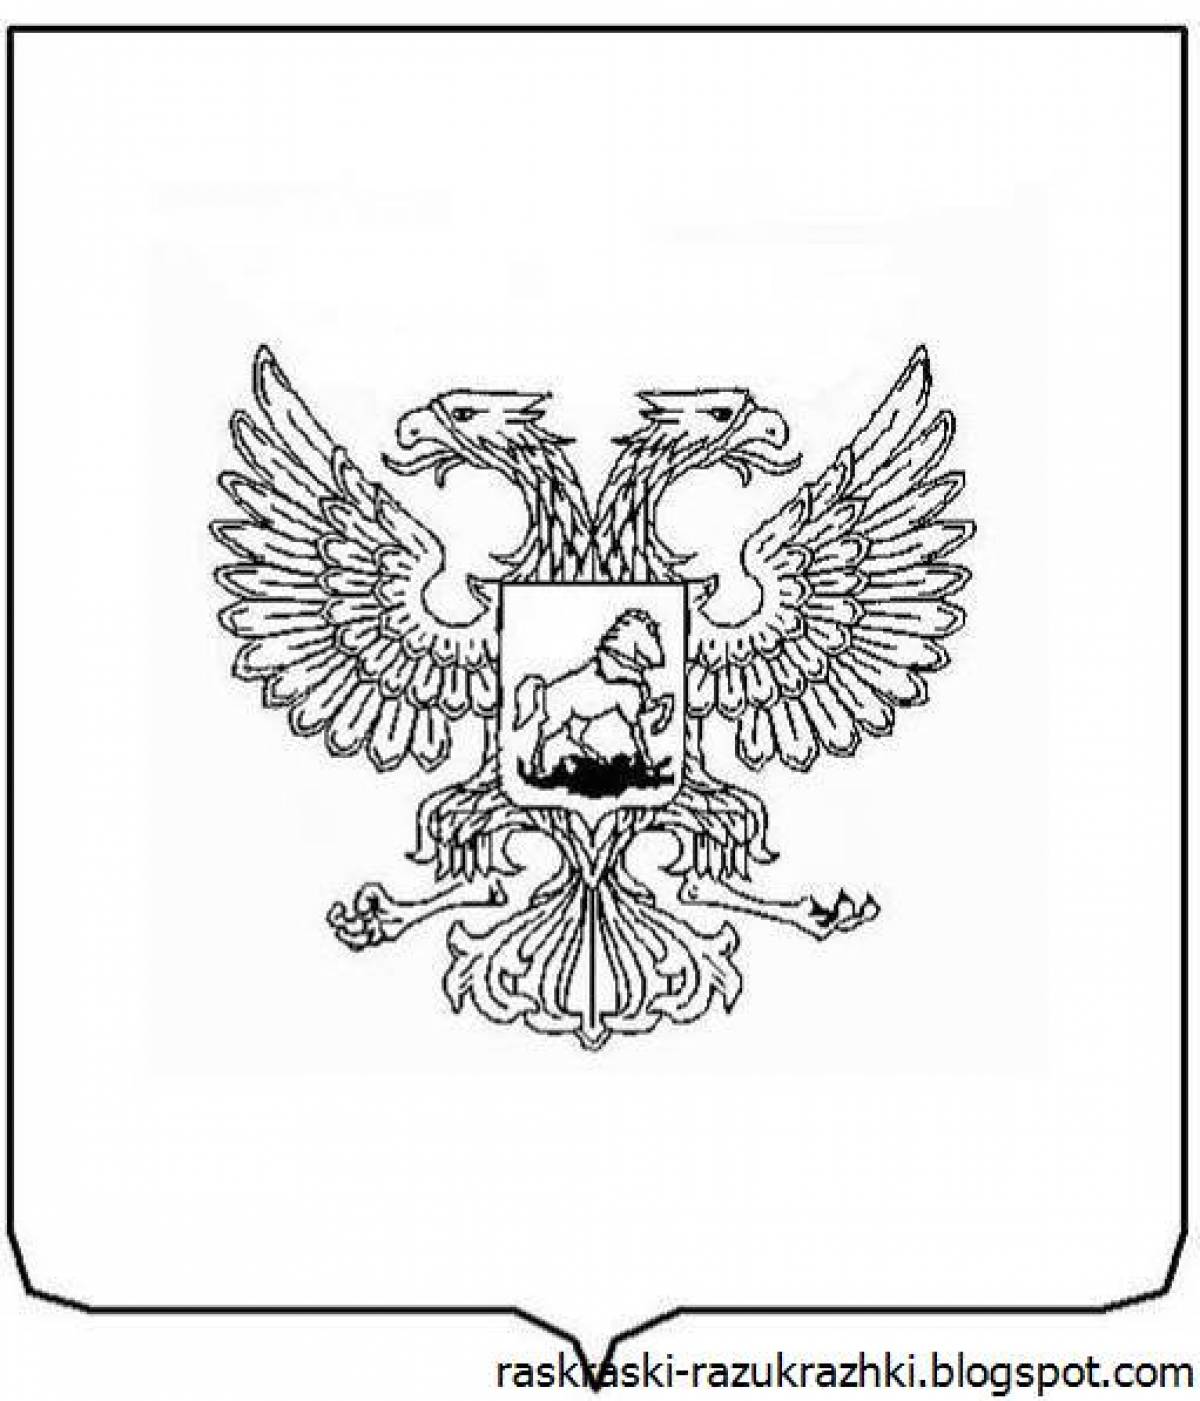 Coat of arms of Russia #1